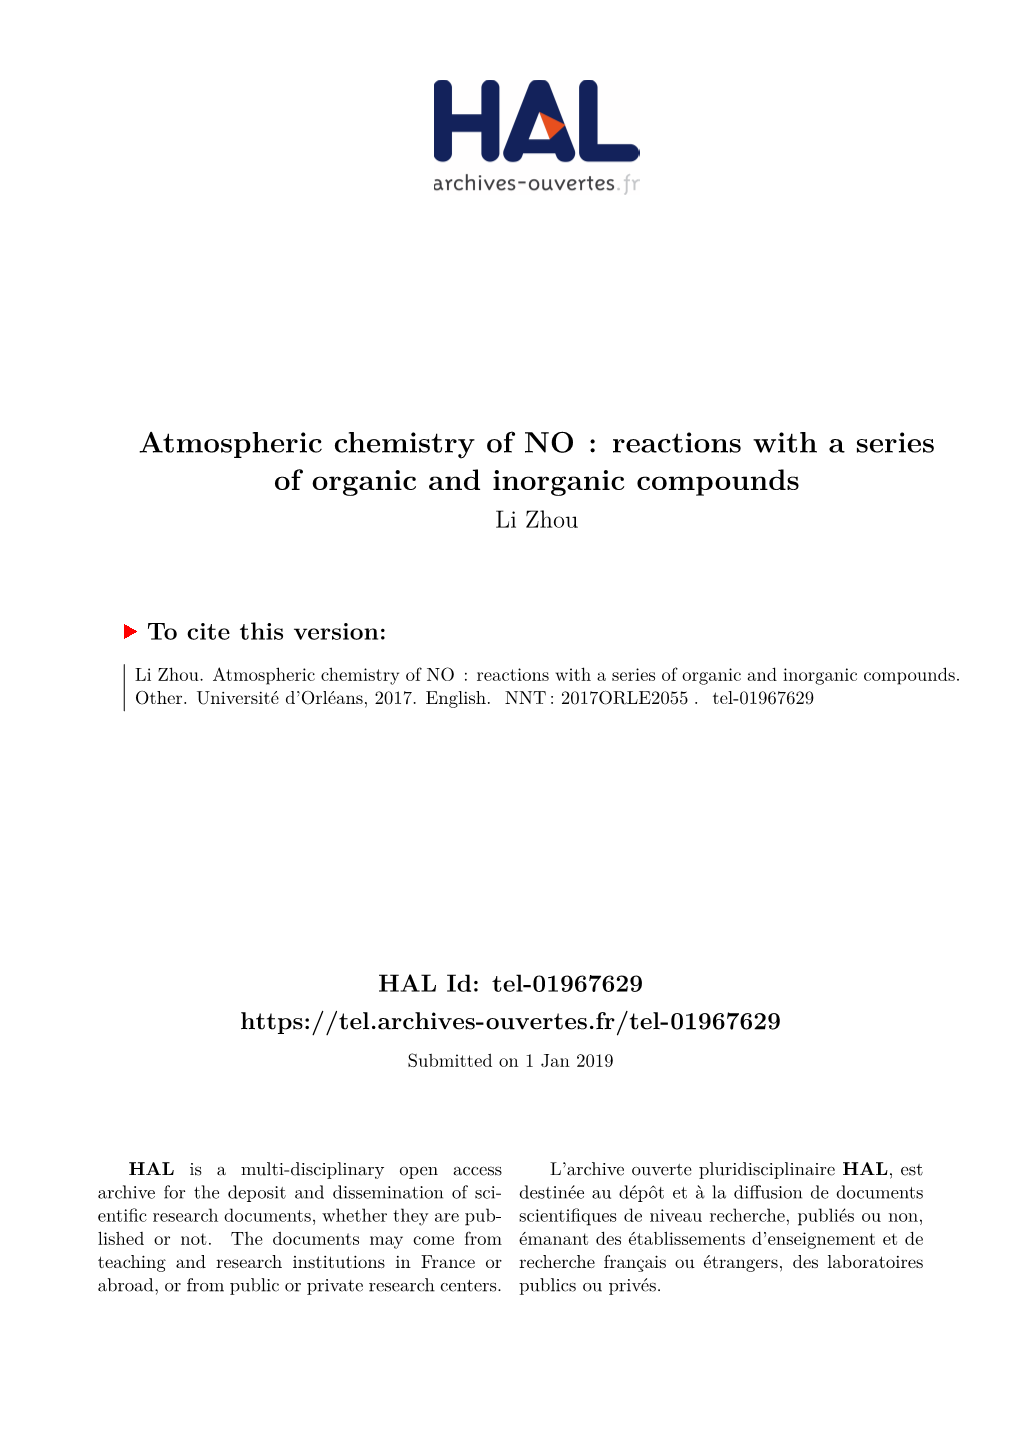 Atmospheric Chemistry of NO₃: Reactions with a Series of Organic